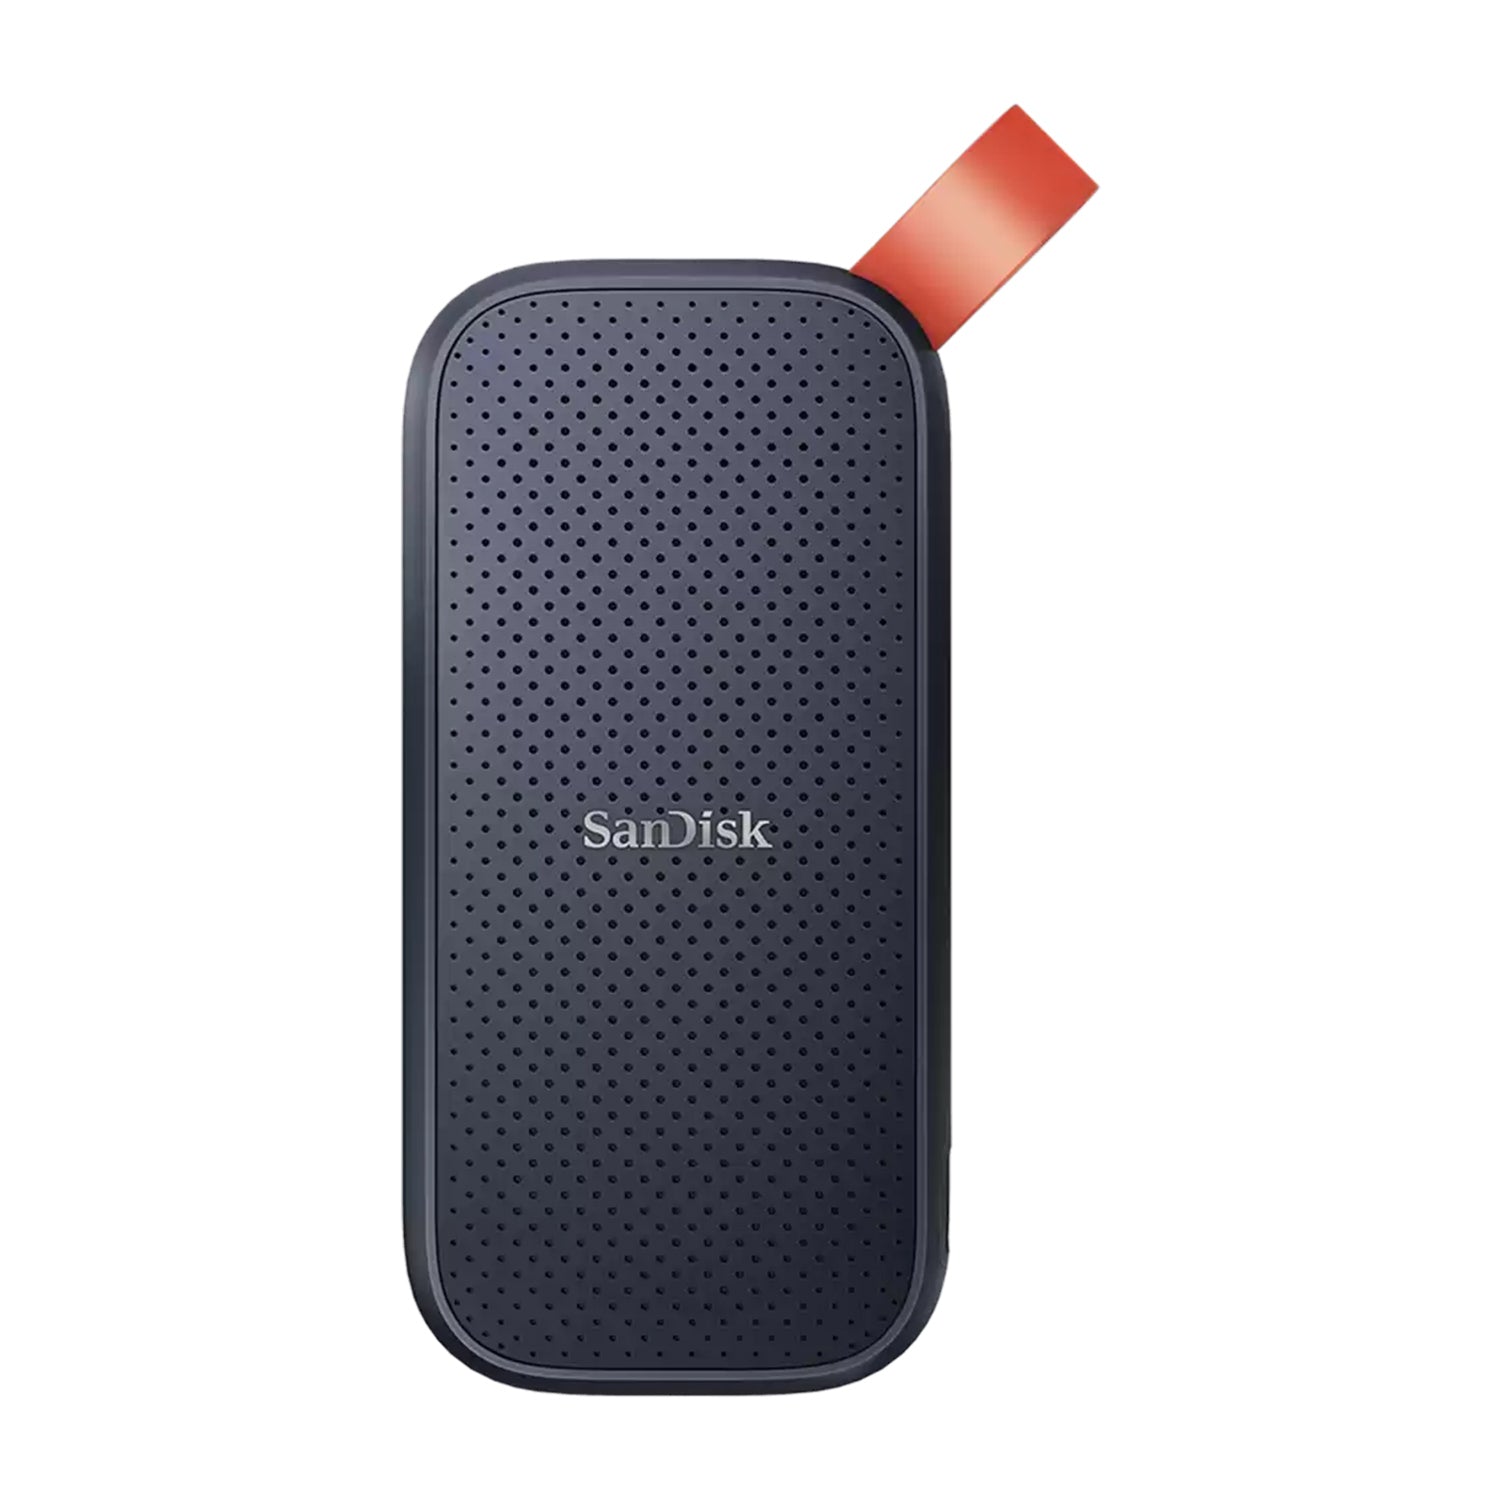 SanDisk 2TB Portable SSD with Type-C